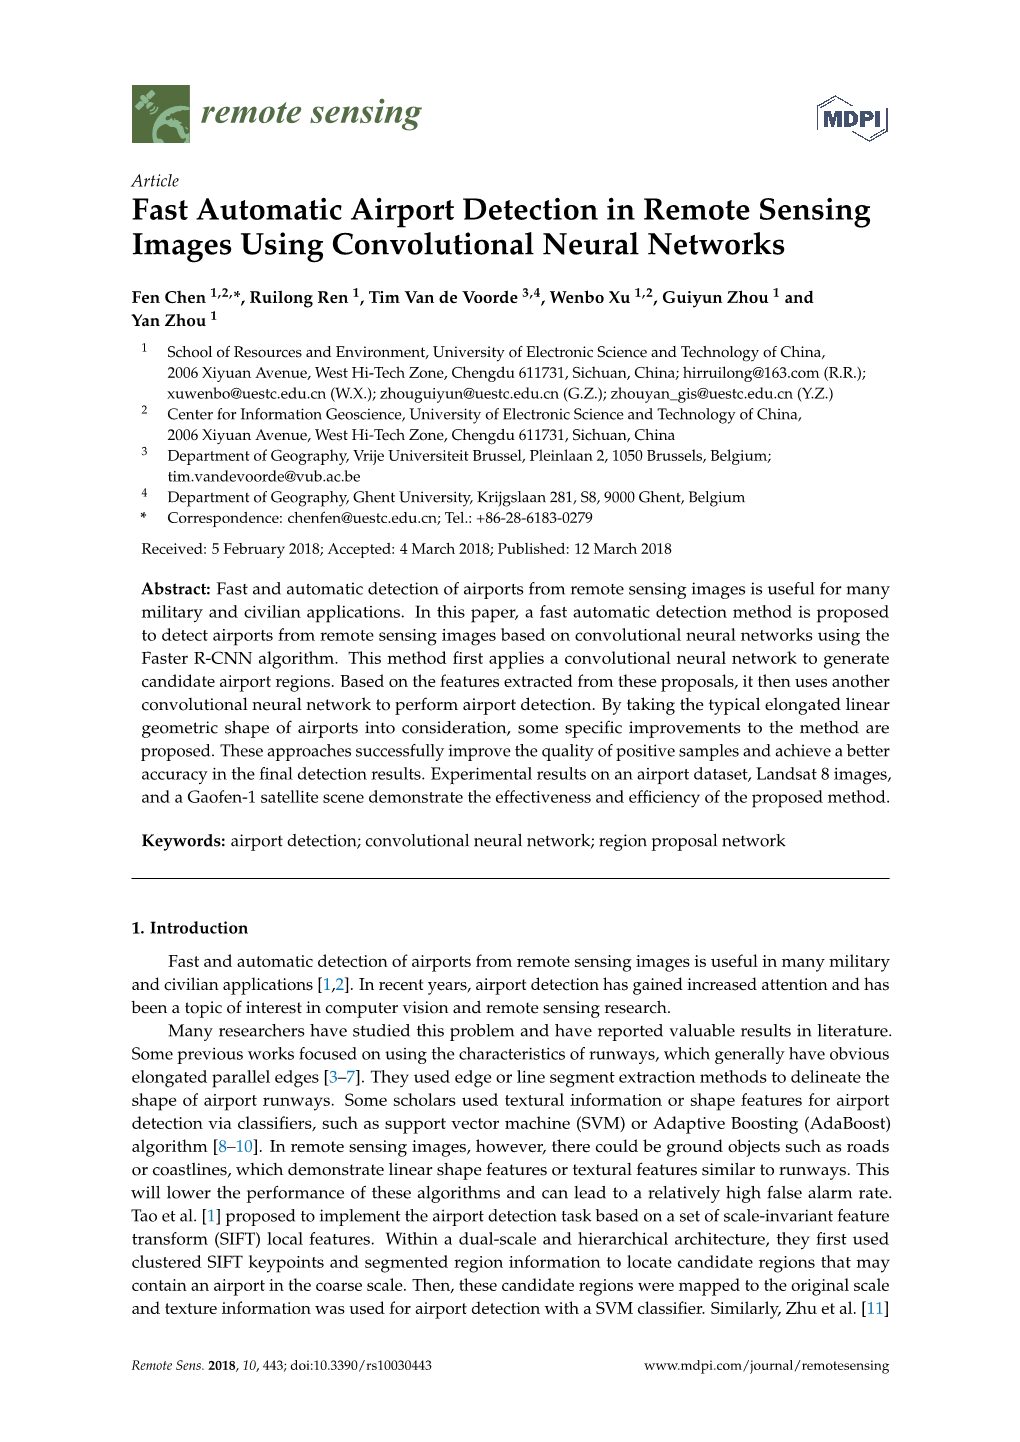 Fast Automatic Airport Detection in Remote Sensing Images Using Convolutional Neural Networks